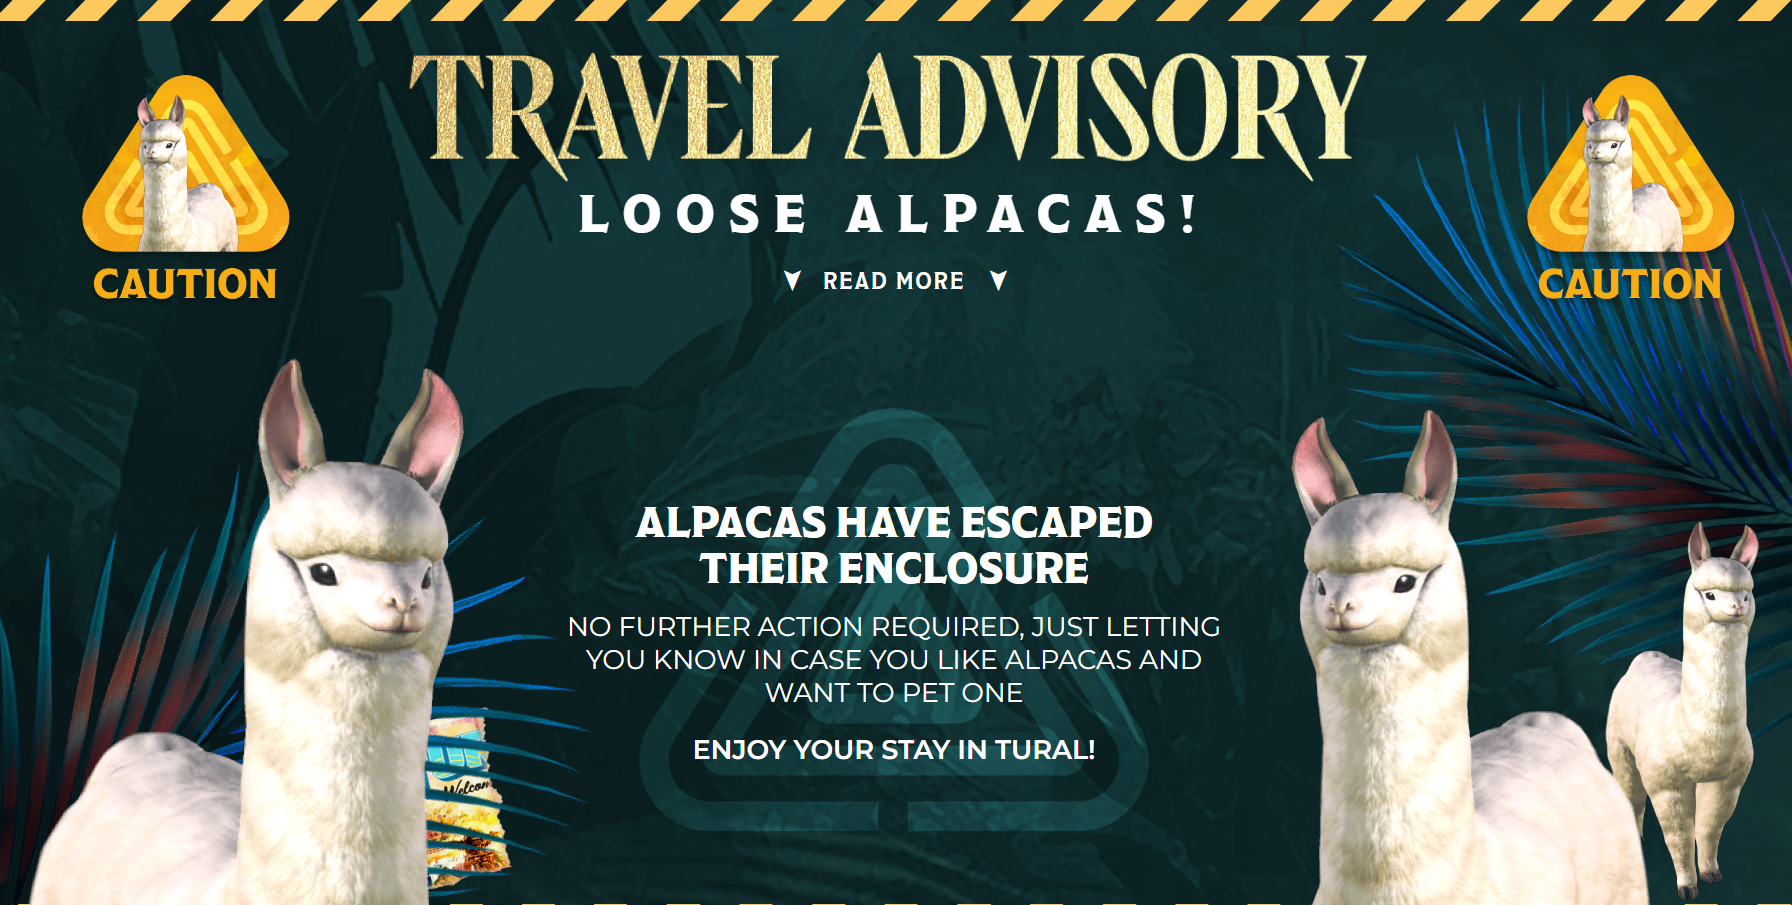 A travel advisory for Final Fantasy 14: Dawntrail, which alerts travellers to loose Alpacas 